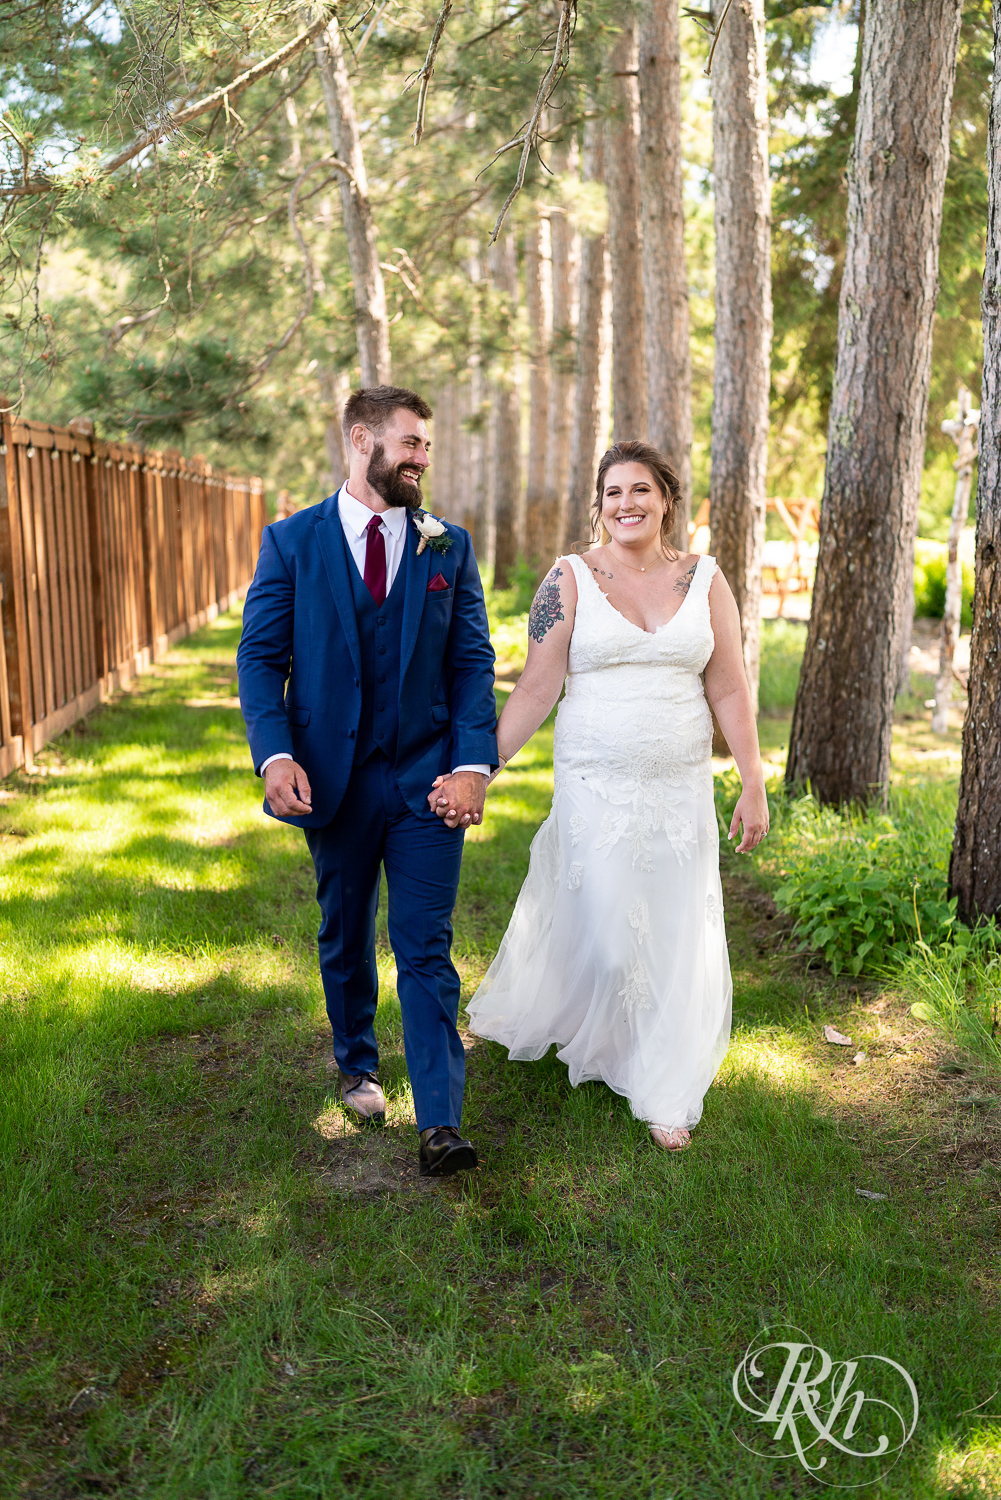 Bride and groom walk between pine trees at Pine Peaks Event Center in Pine River, Minnesota.